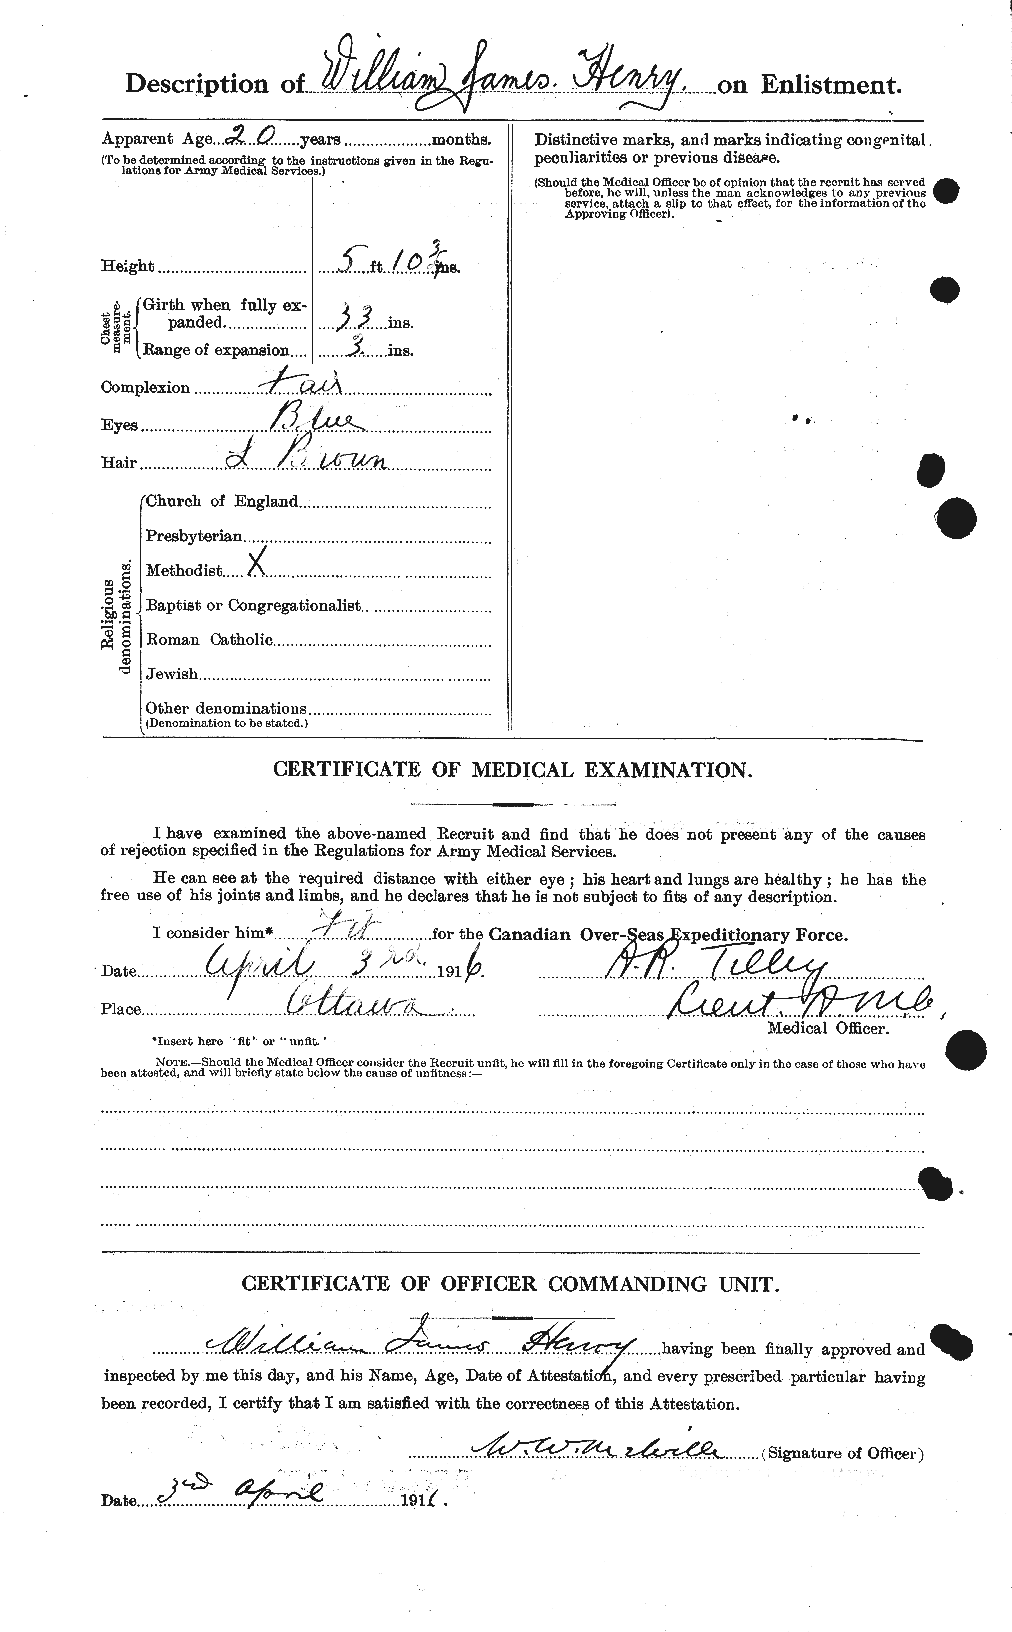 Personnel Records of the First World War - CEF 387779b